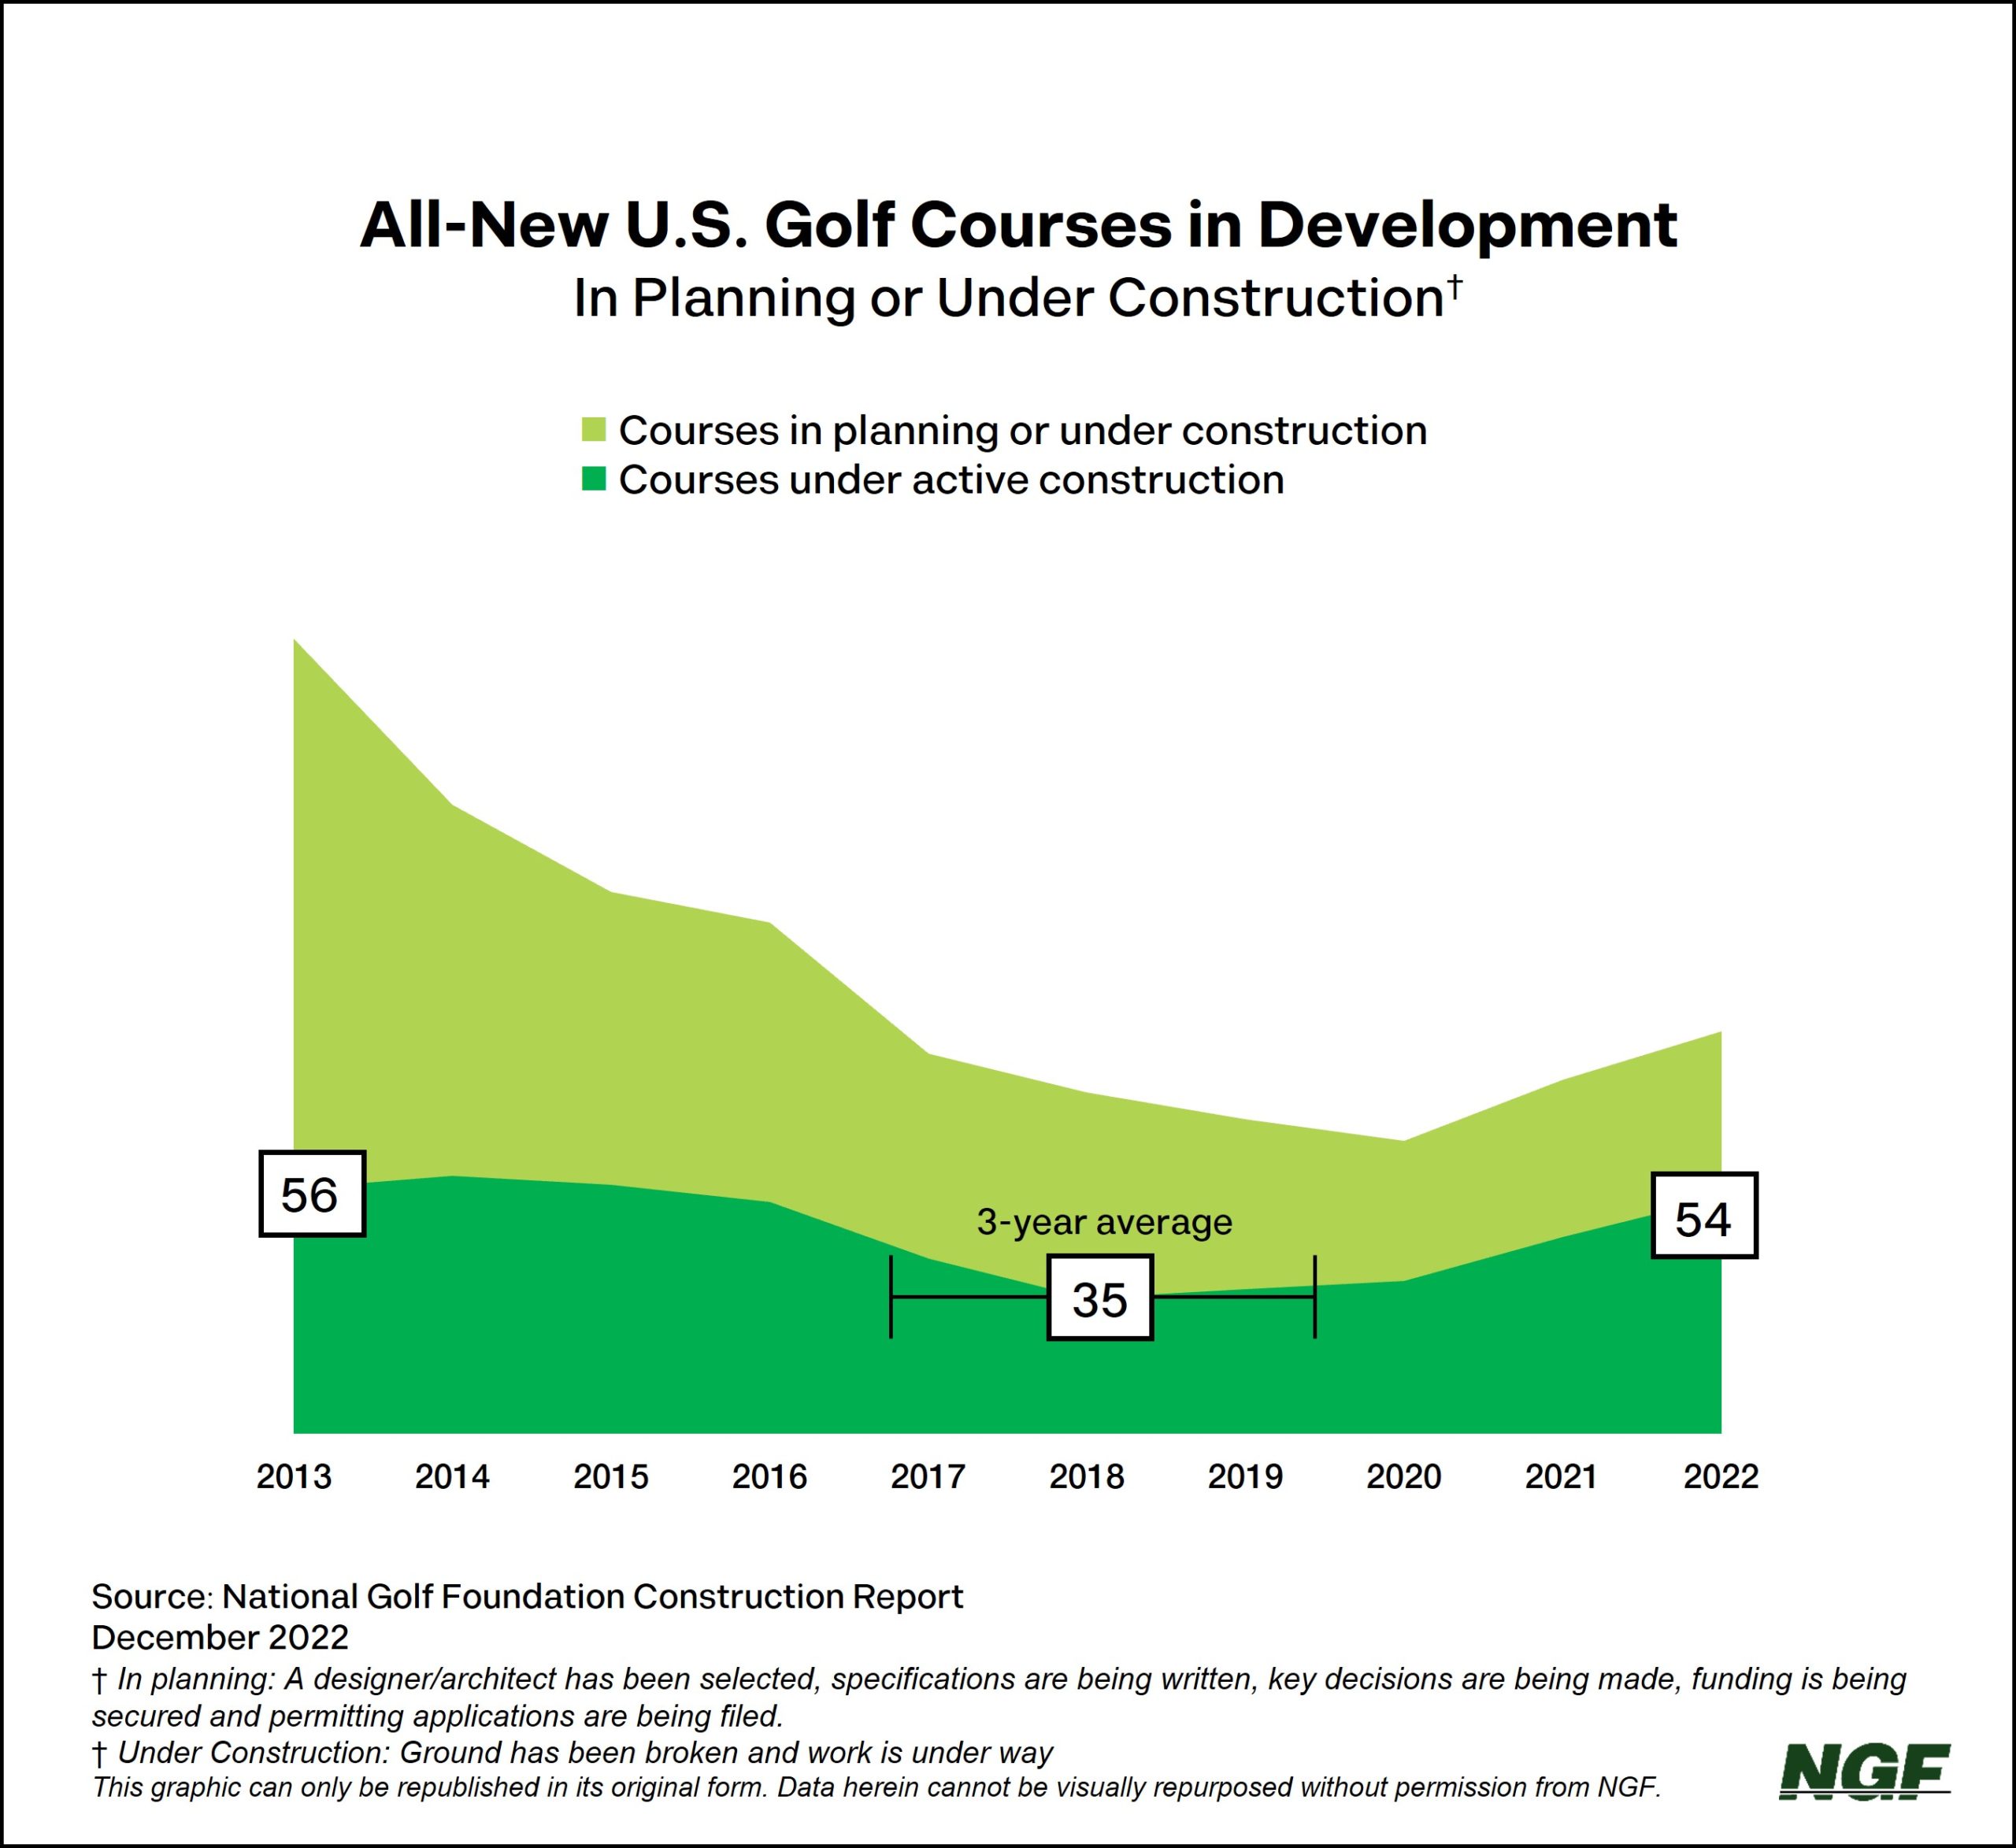 Is New Course Construction Picking Up?